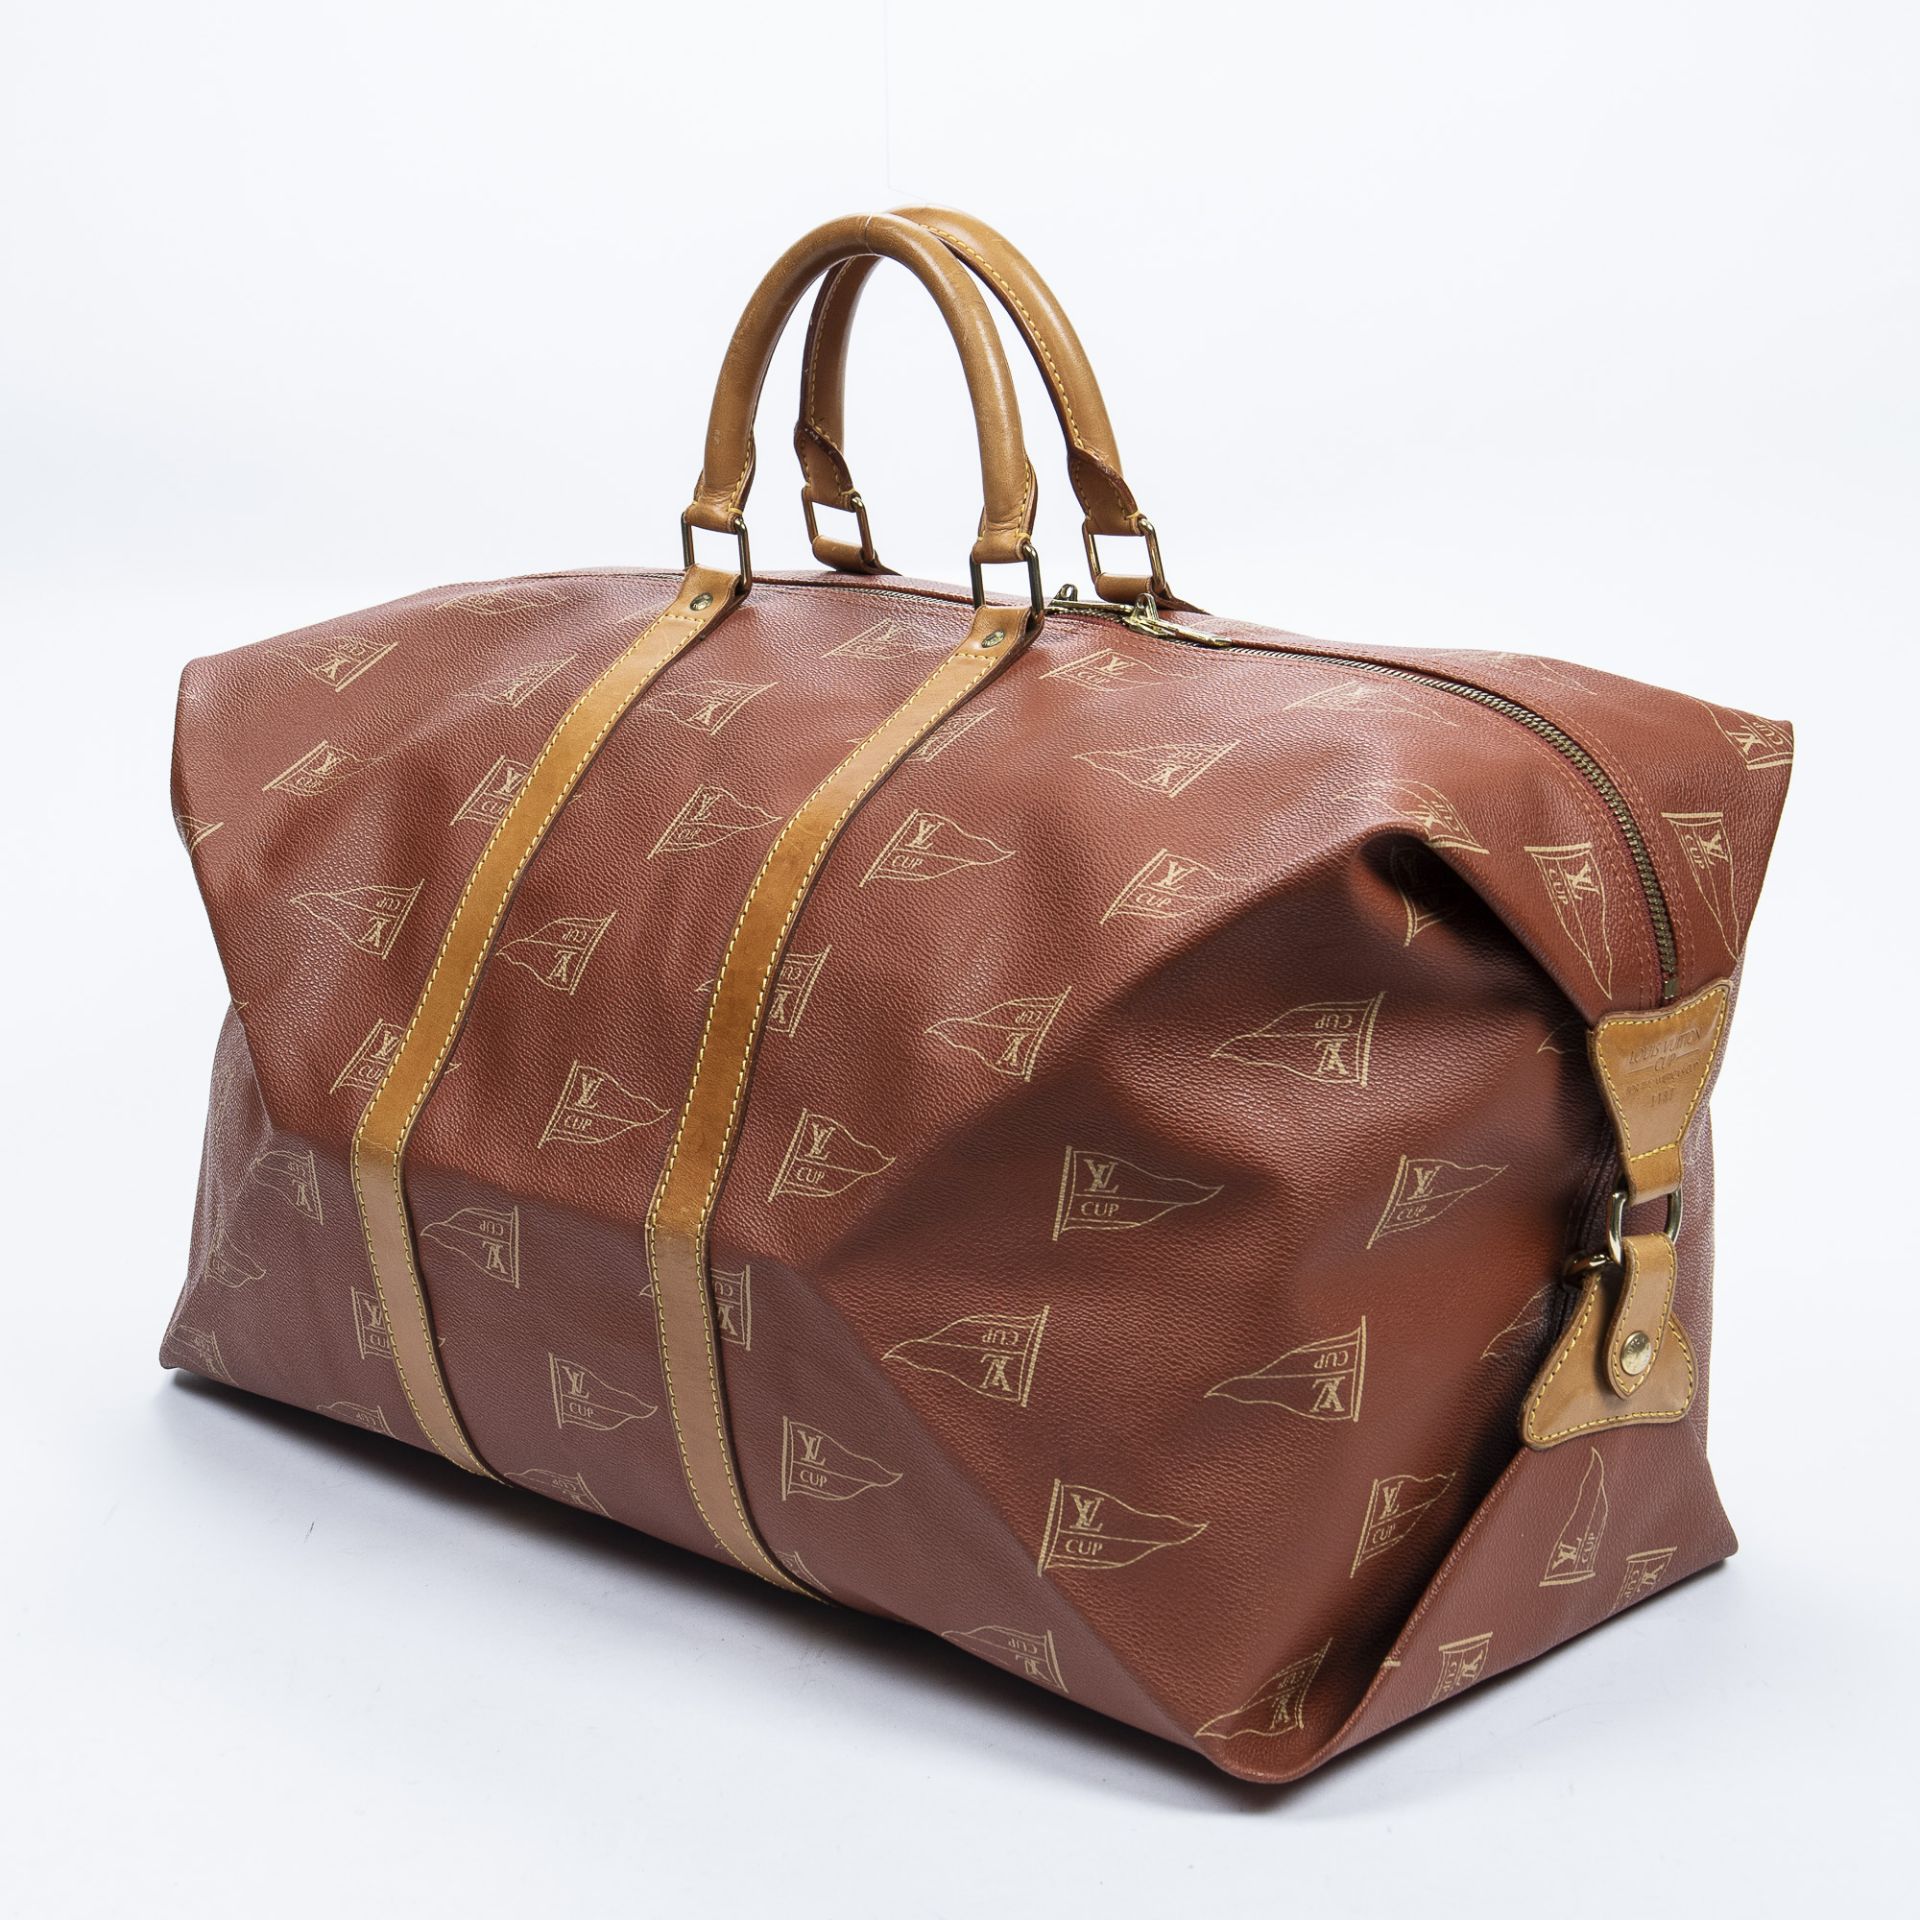 RRP £1,600.00 Lot To Contain 1 Louis Vuitton Coated Canvas Ltd. Ed. "LV America's Cup Edition" Kabul - Image 2 of 3